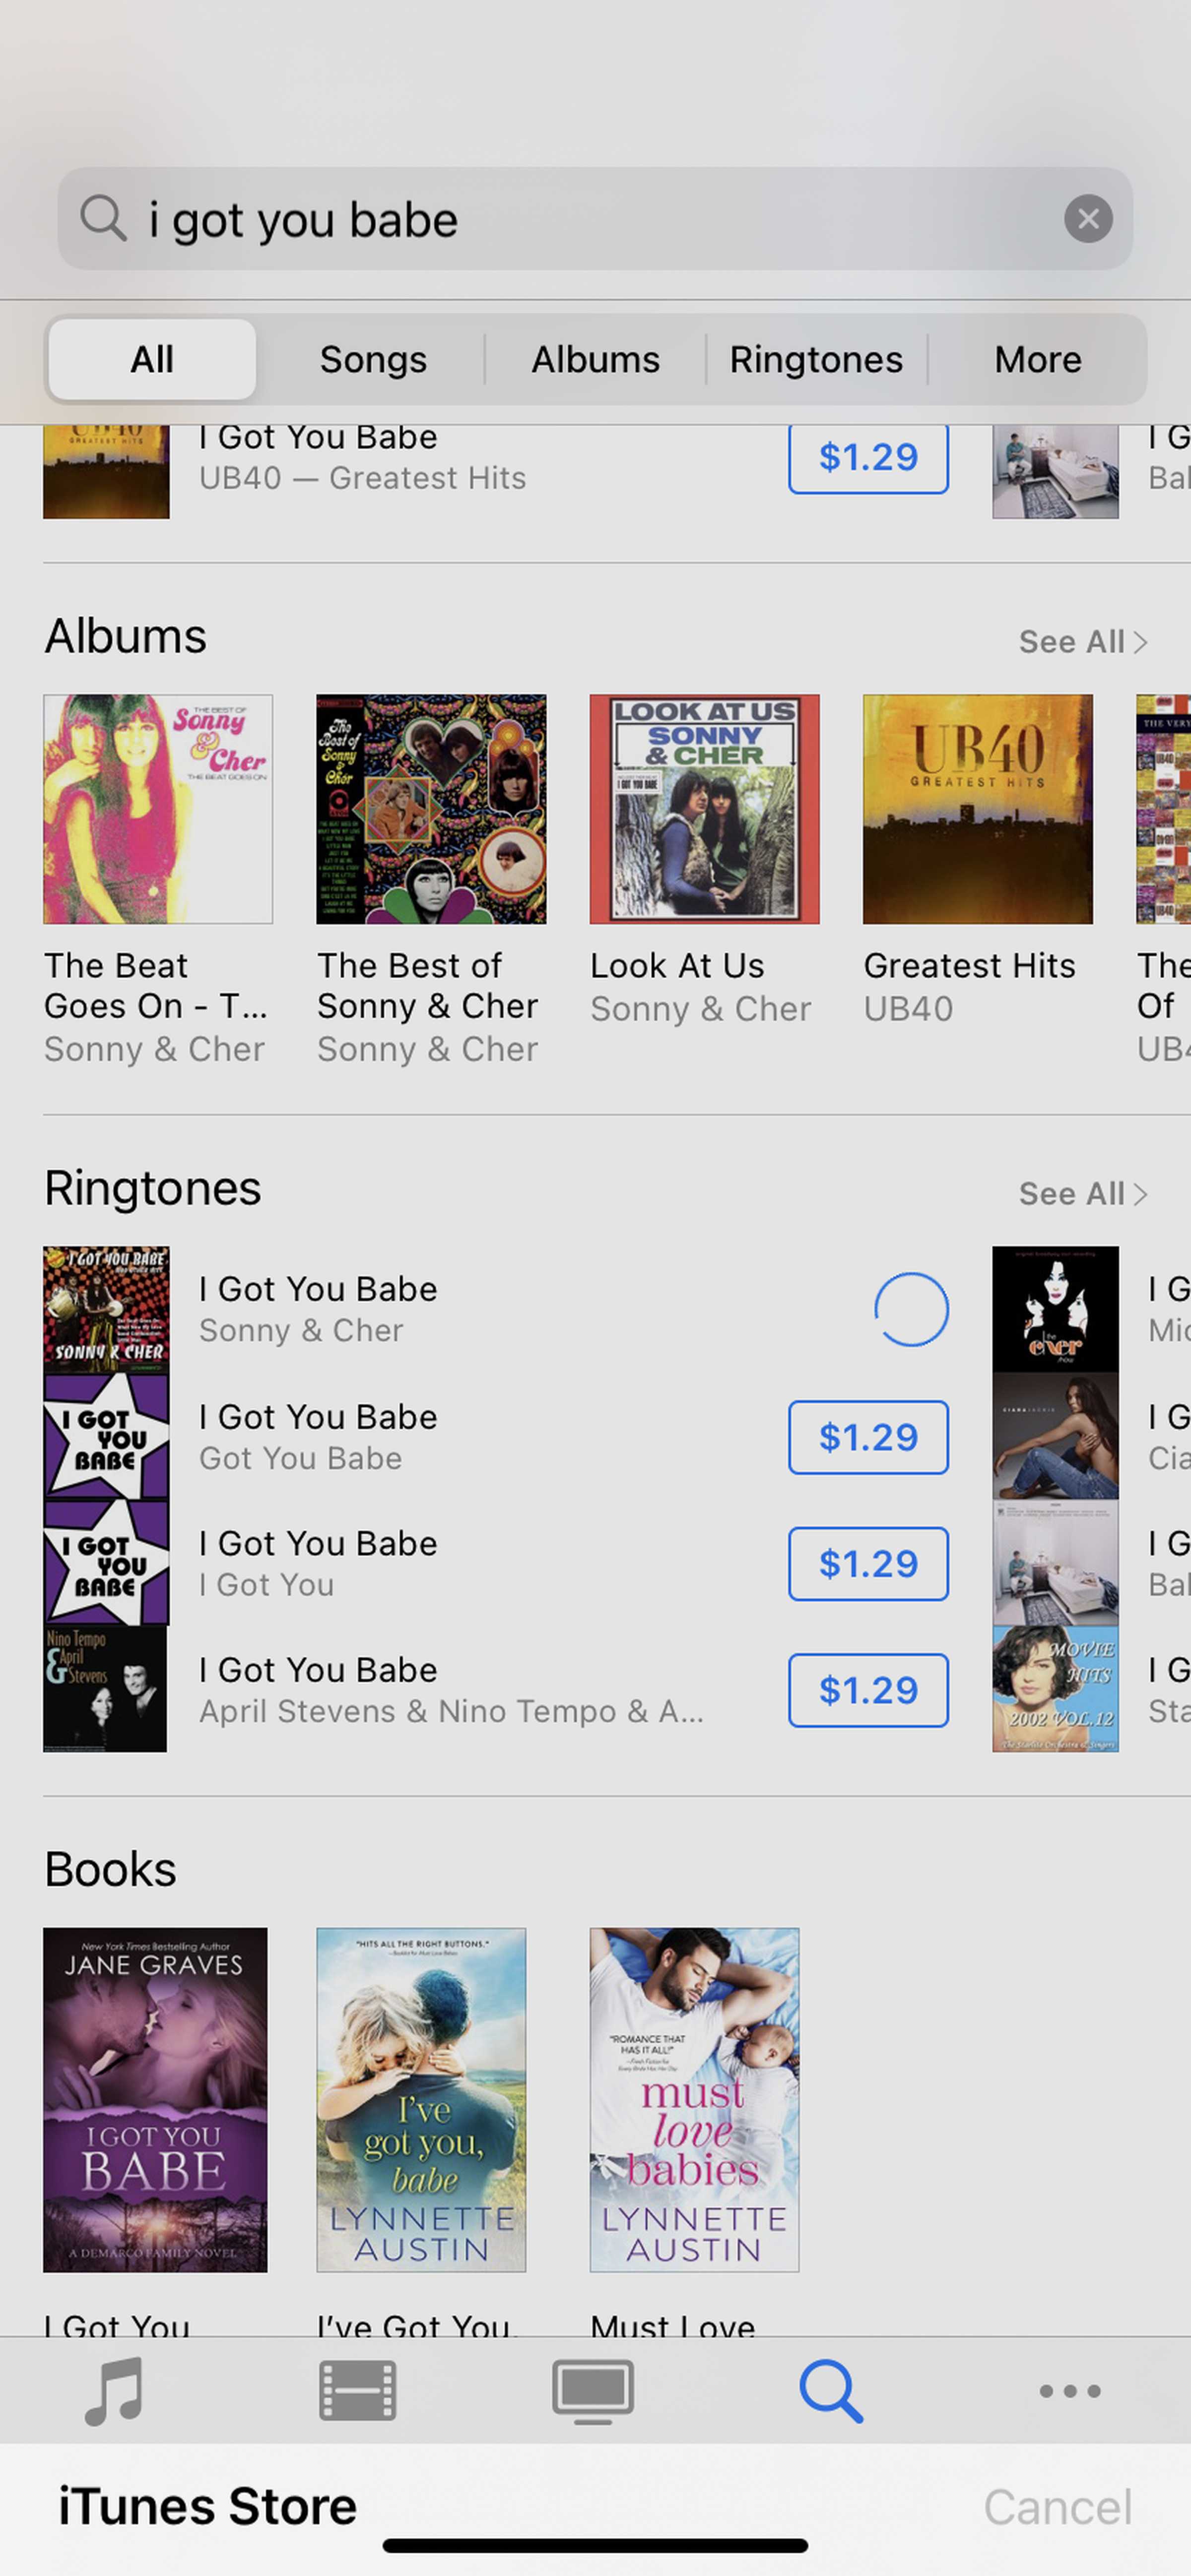 You can download additional (paid) ringtones from the iTunes Store.